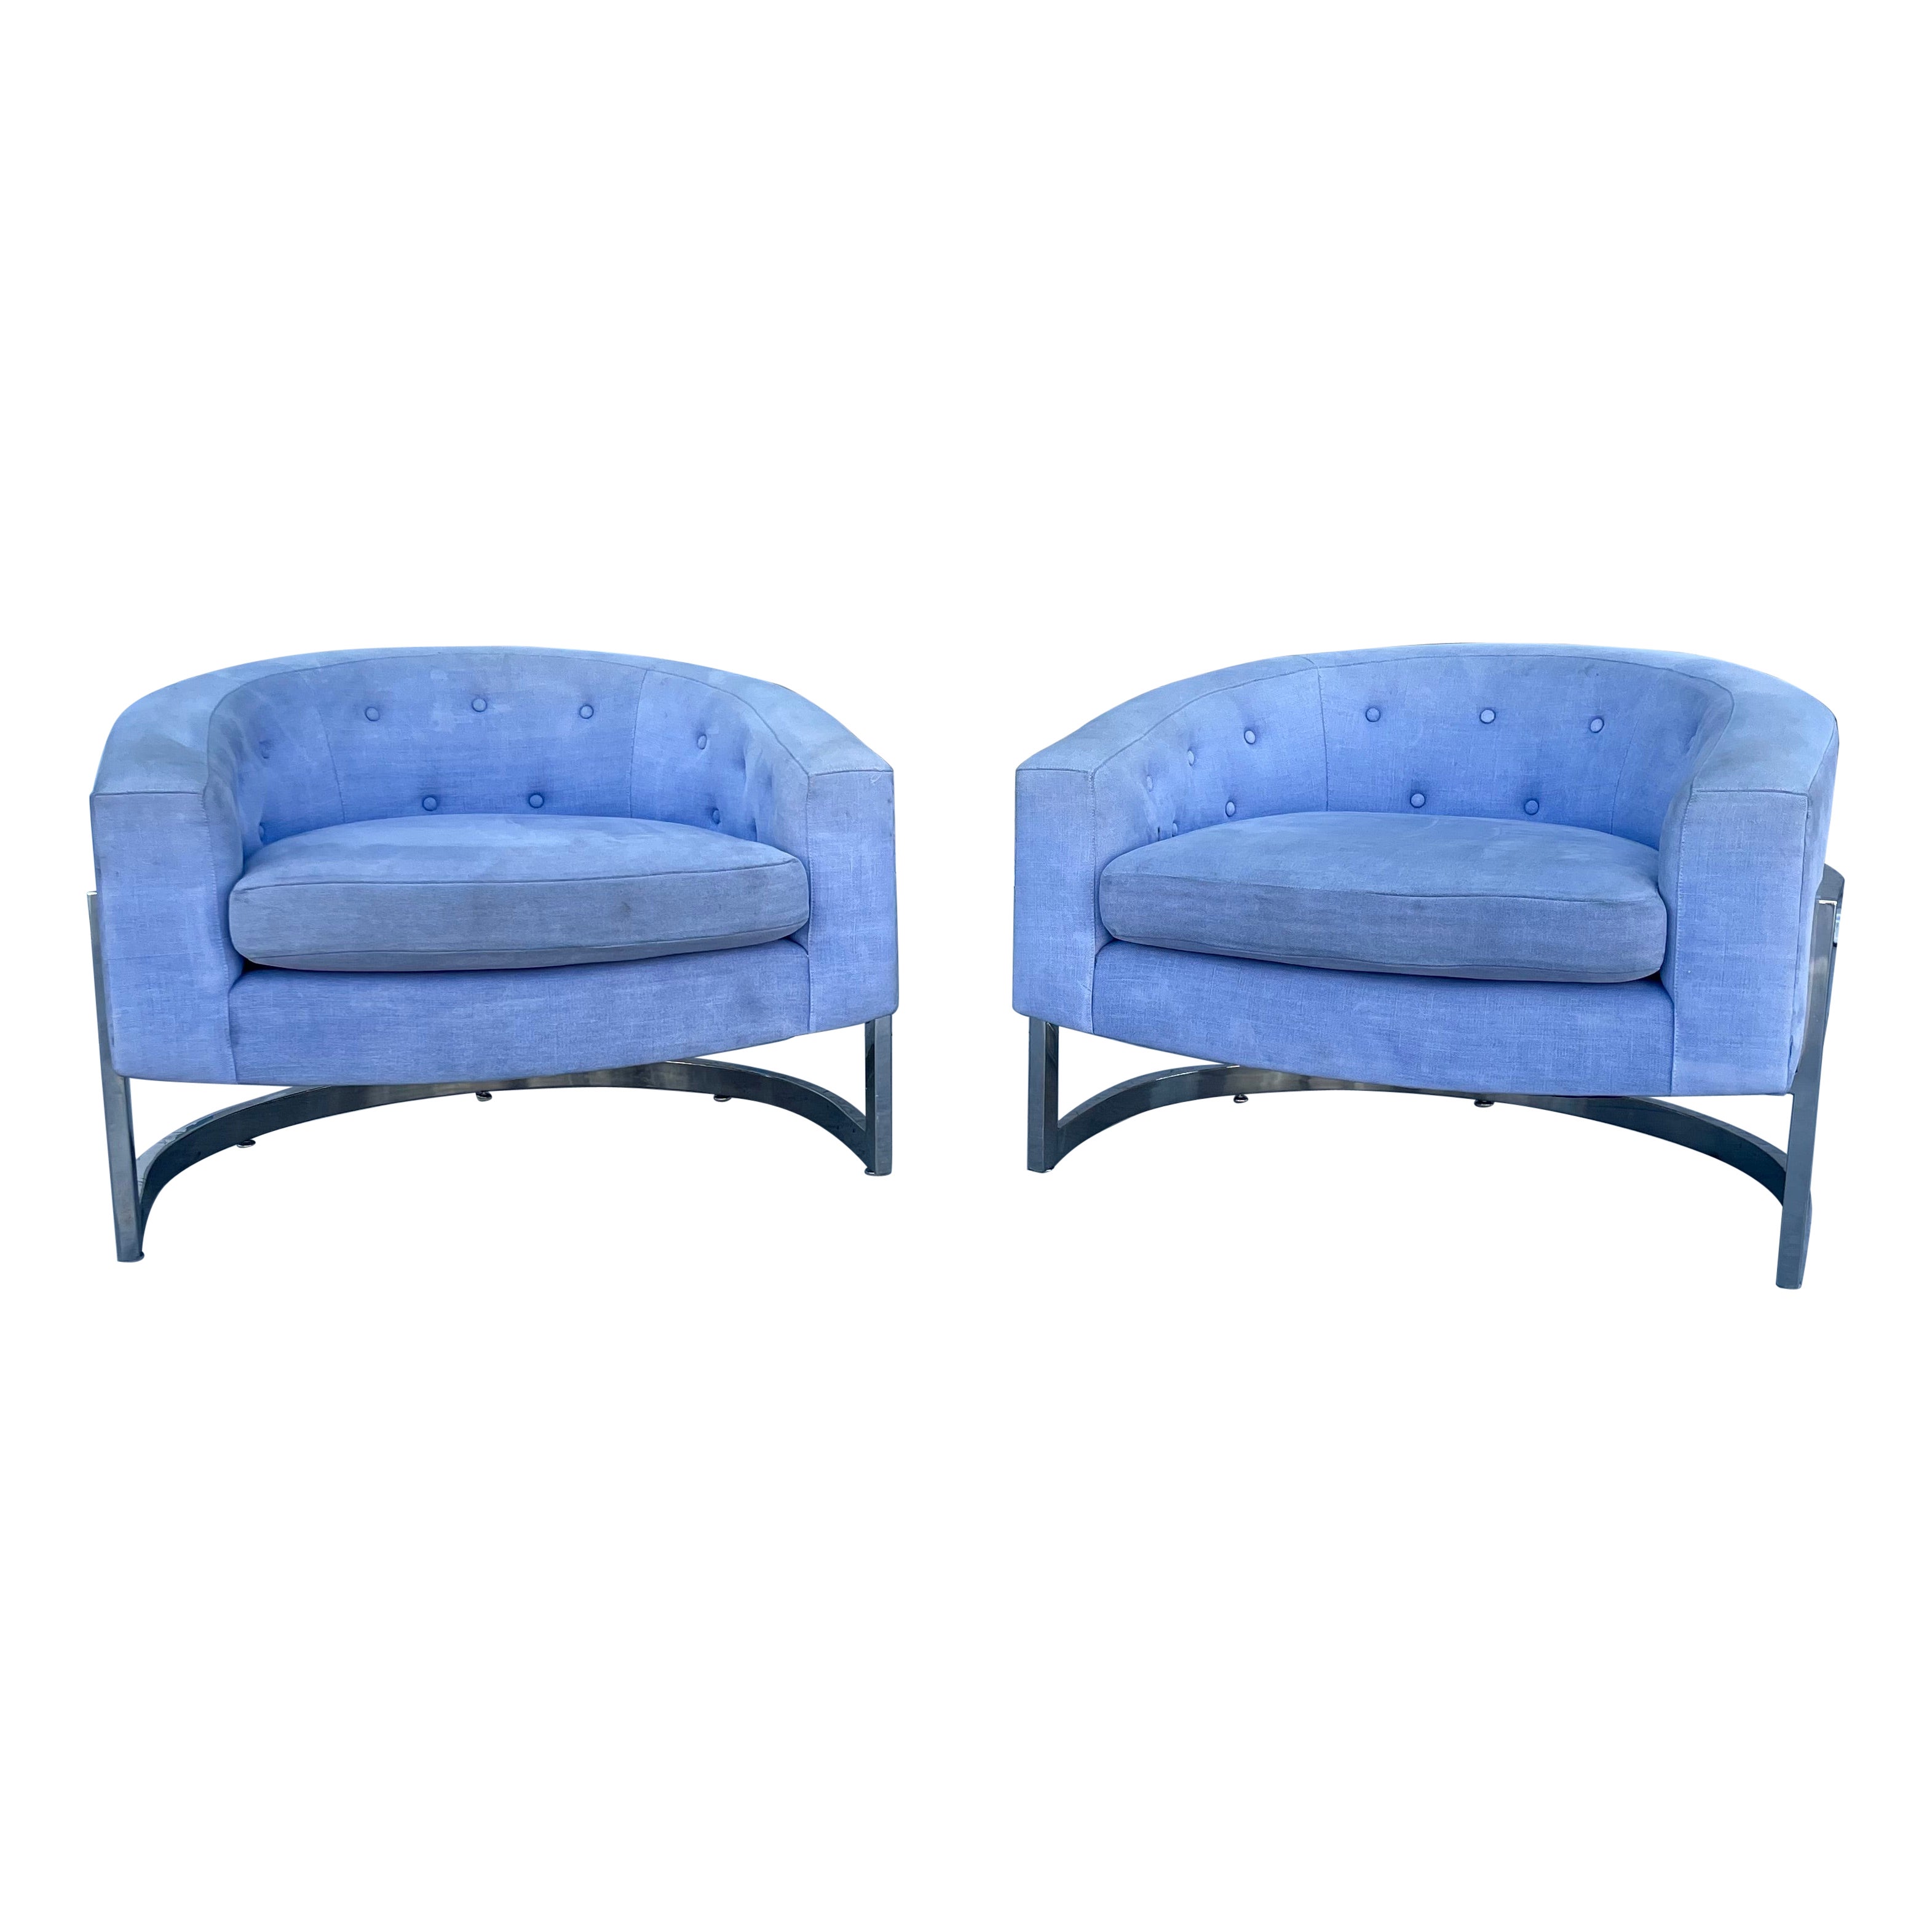 1970s Mid Century Lounge Chairs Styled After Milo Baughman - a Pair For Sale